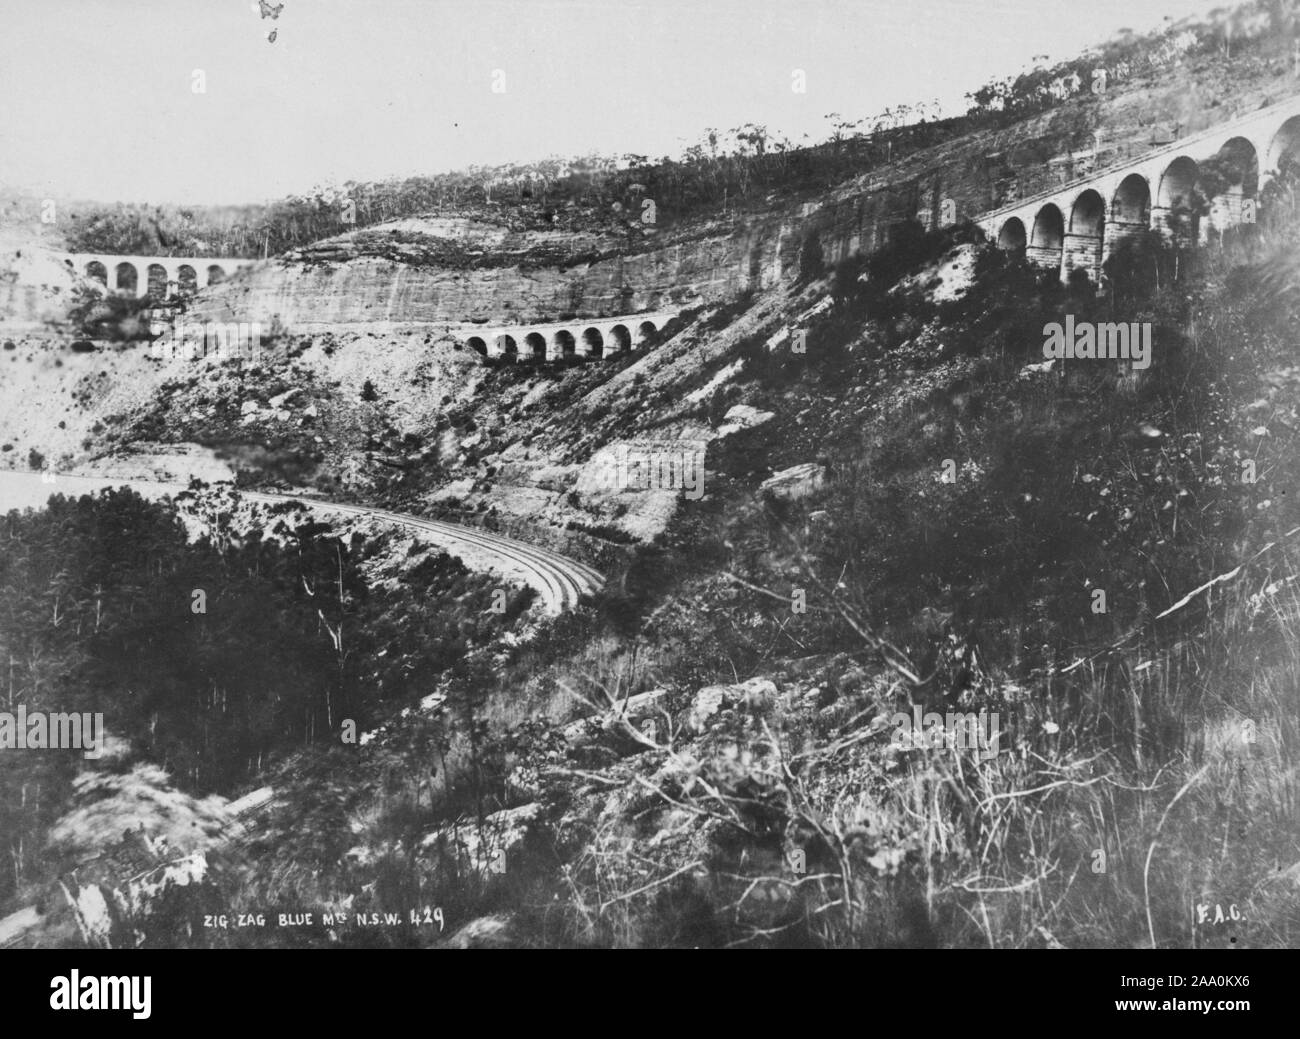 Black and white landscape photograph of the Zig Zag Railway on the western flank of the Blue Mountains region of New South Wales, Australia, by photographer Frank Coxhead, 1885. From the New York Public Library. () Stock Photo